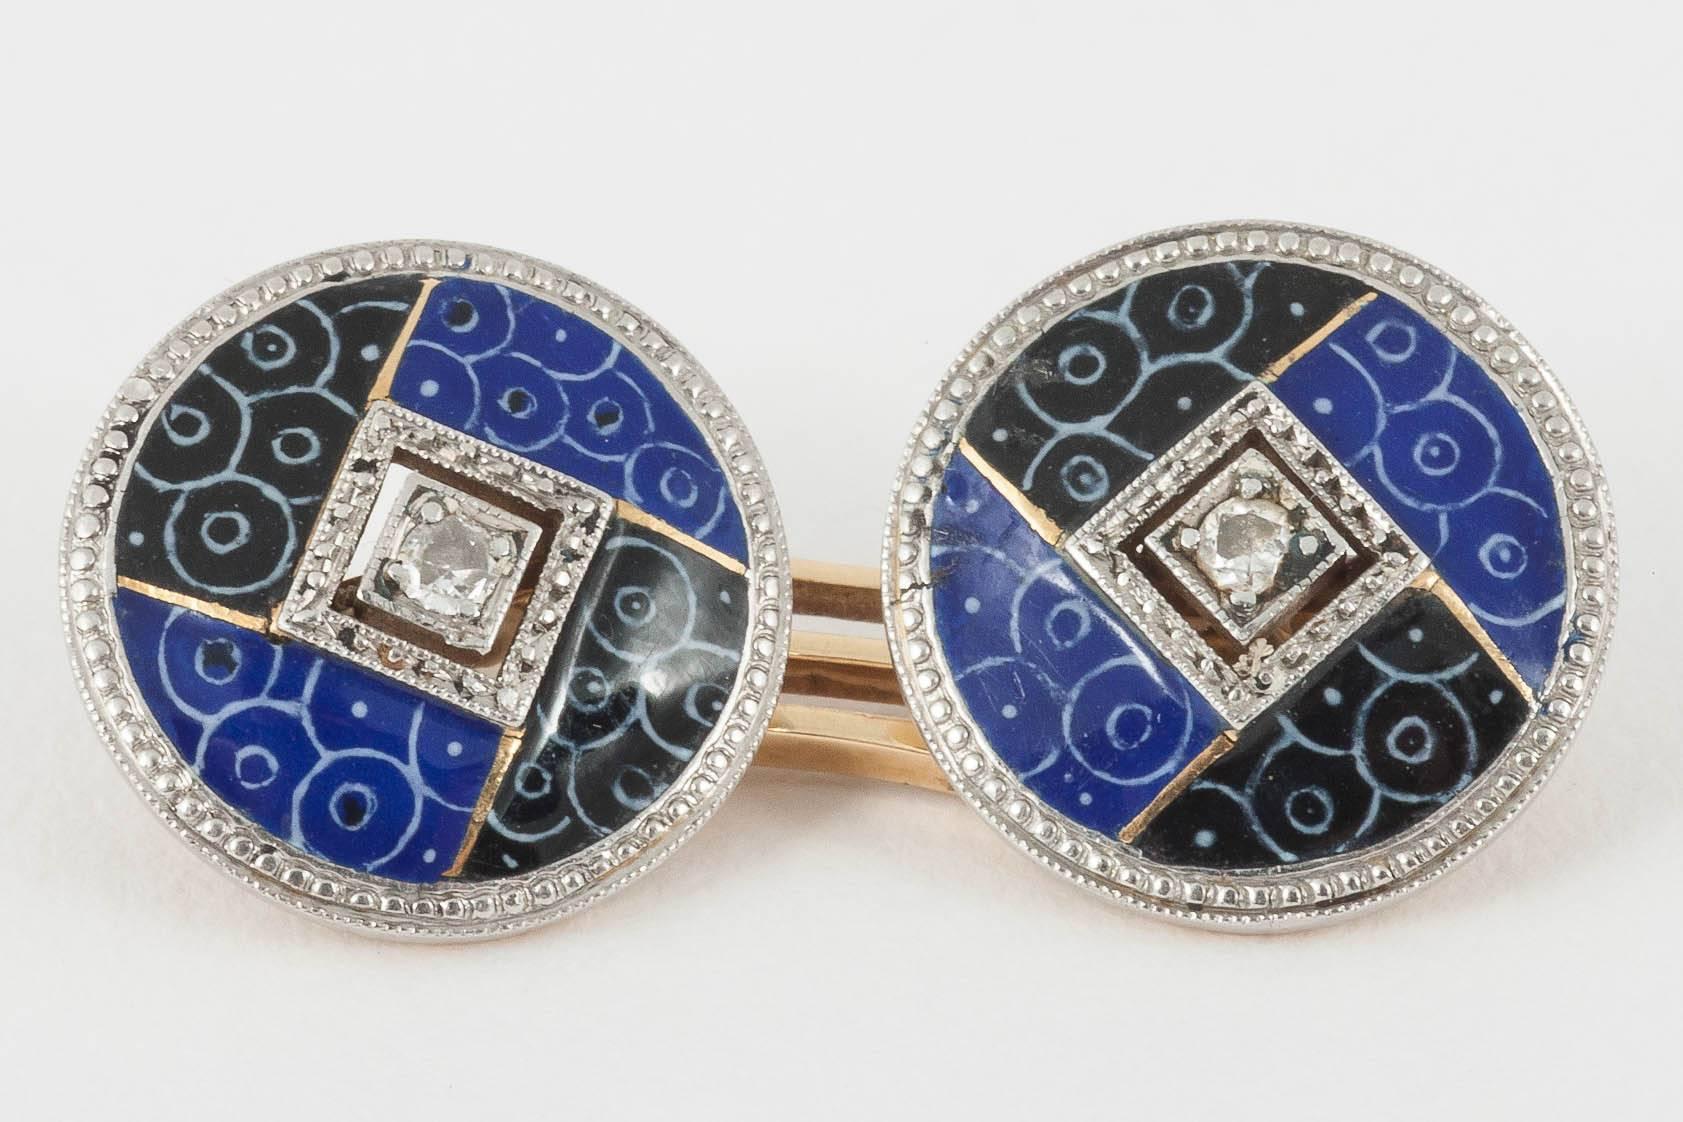 An unusual pair of 18ct gold double sided cufflinks with a central diamond and blue and black enamel quarters with white enamel circles. English c , 1920